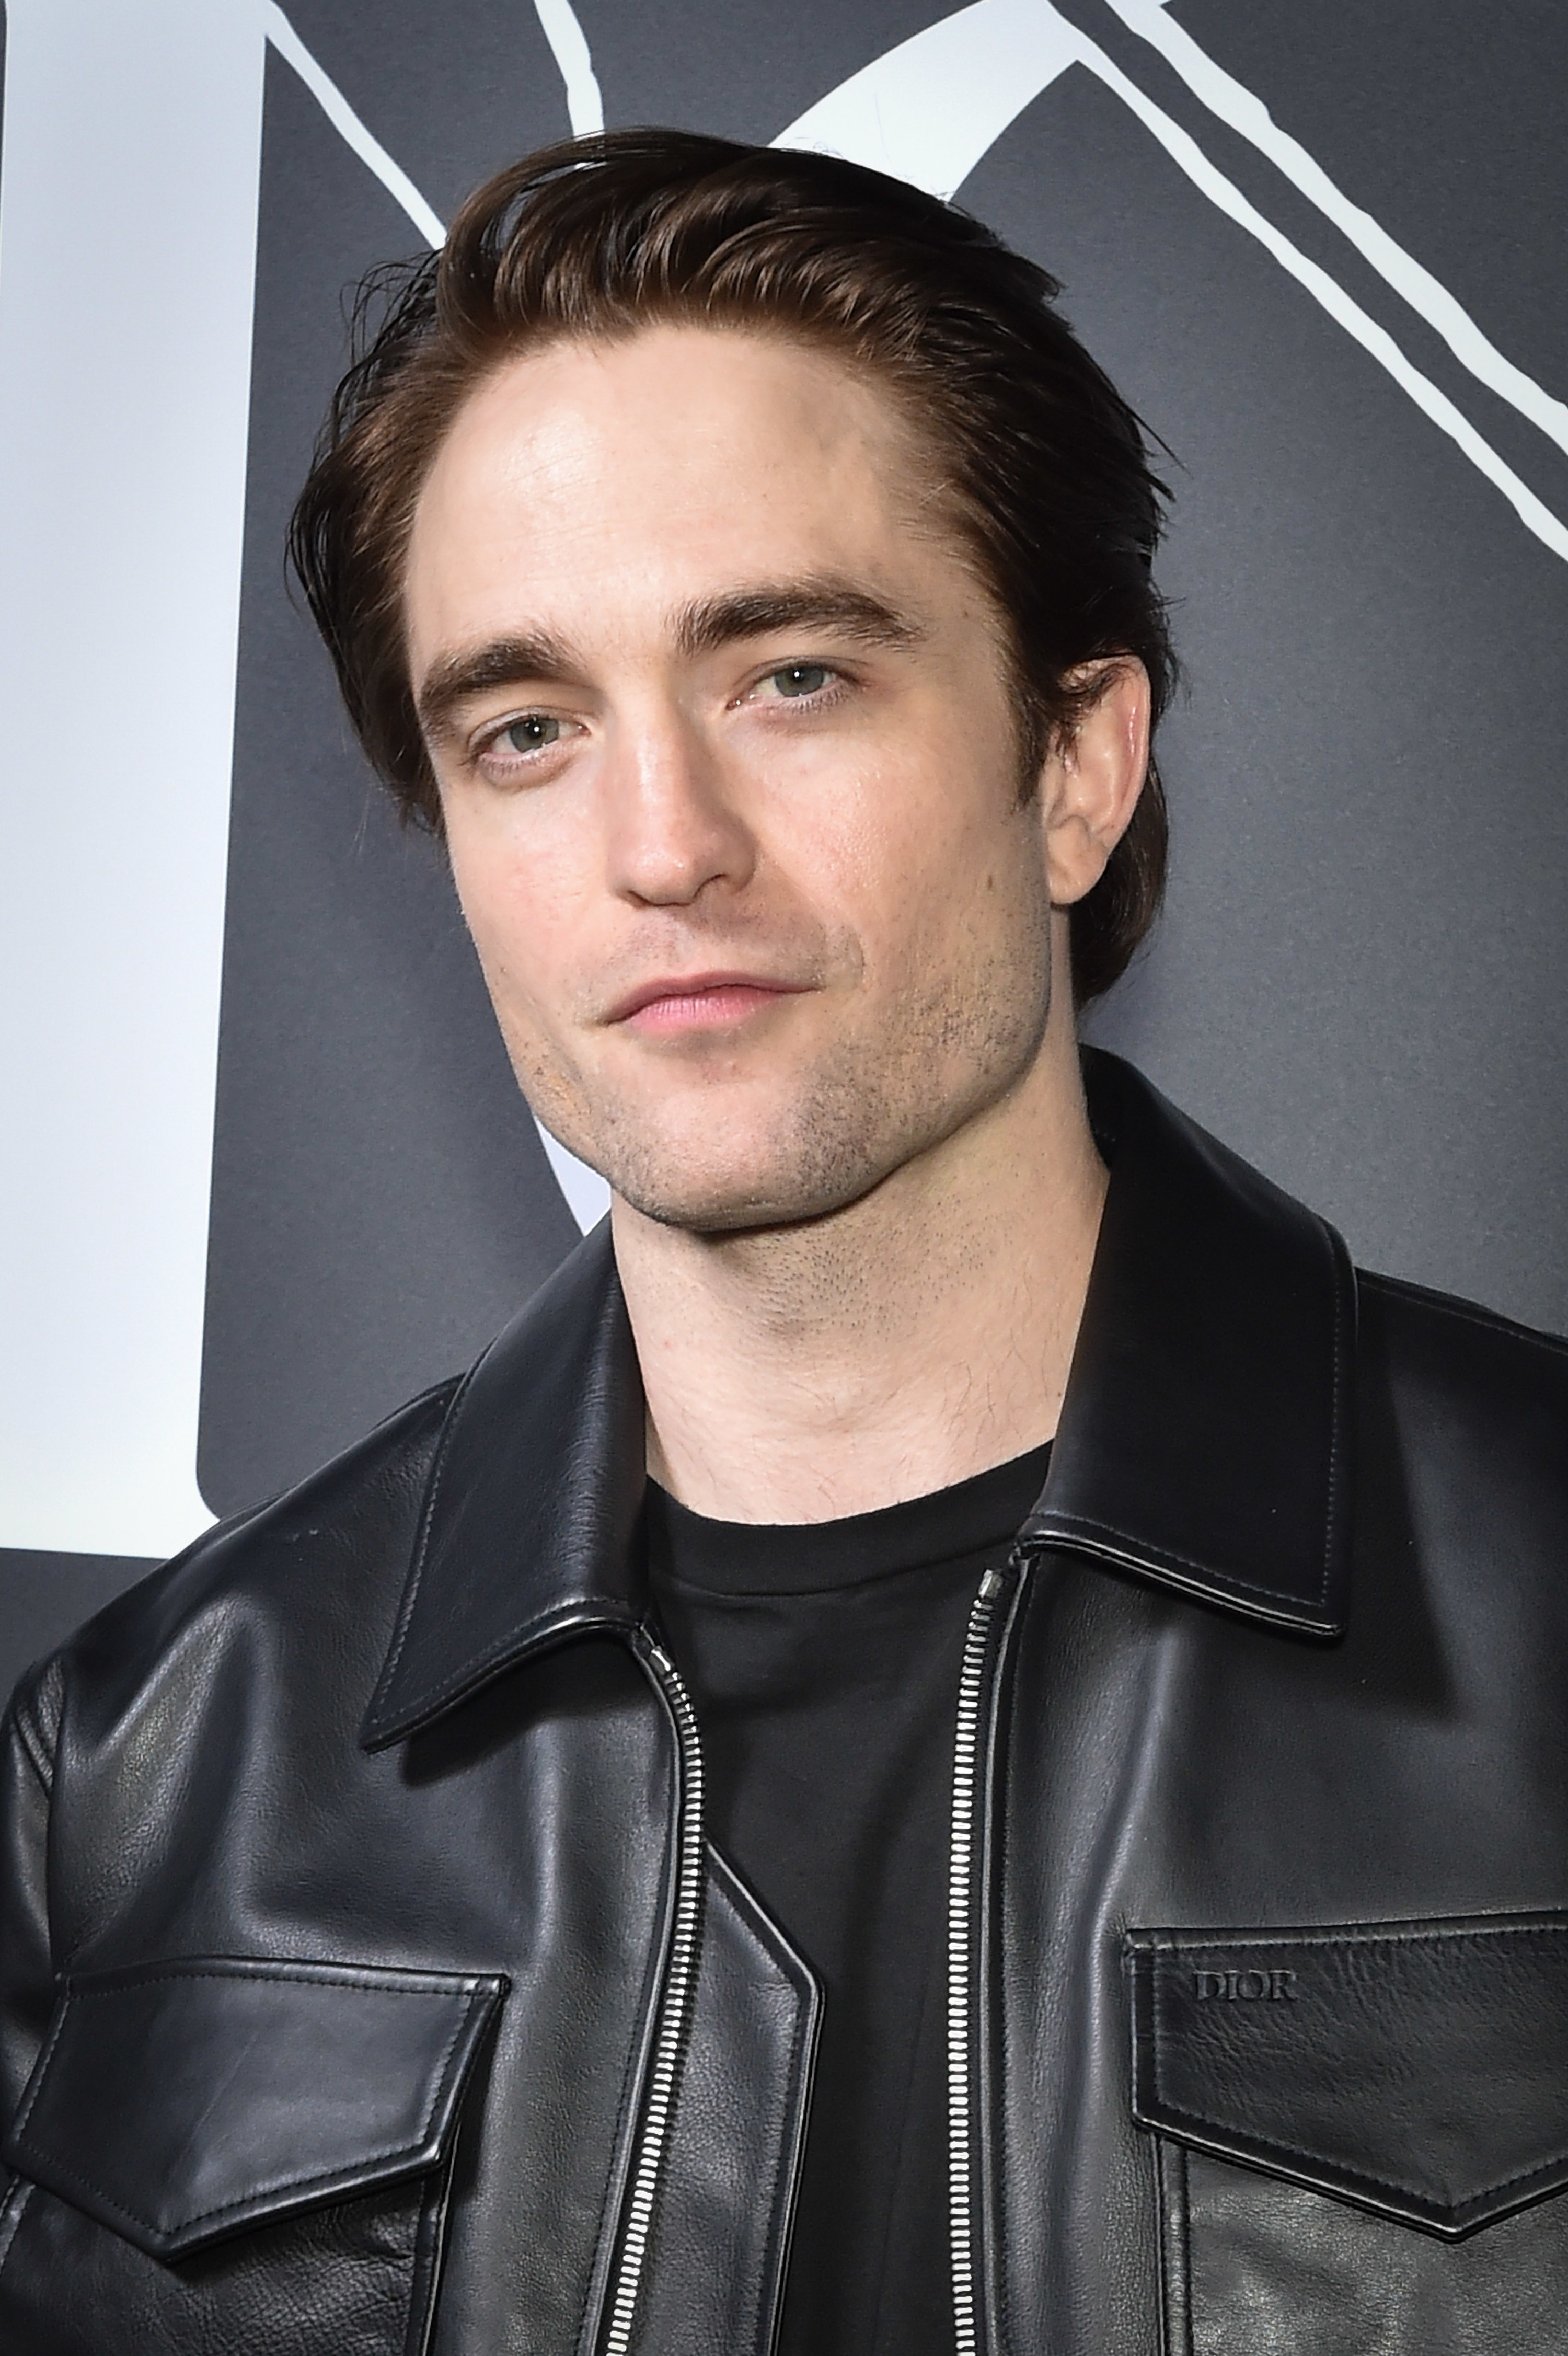 Pattinson at the Dior Homme Menswear show in 2020